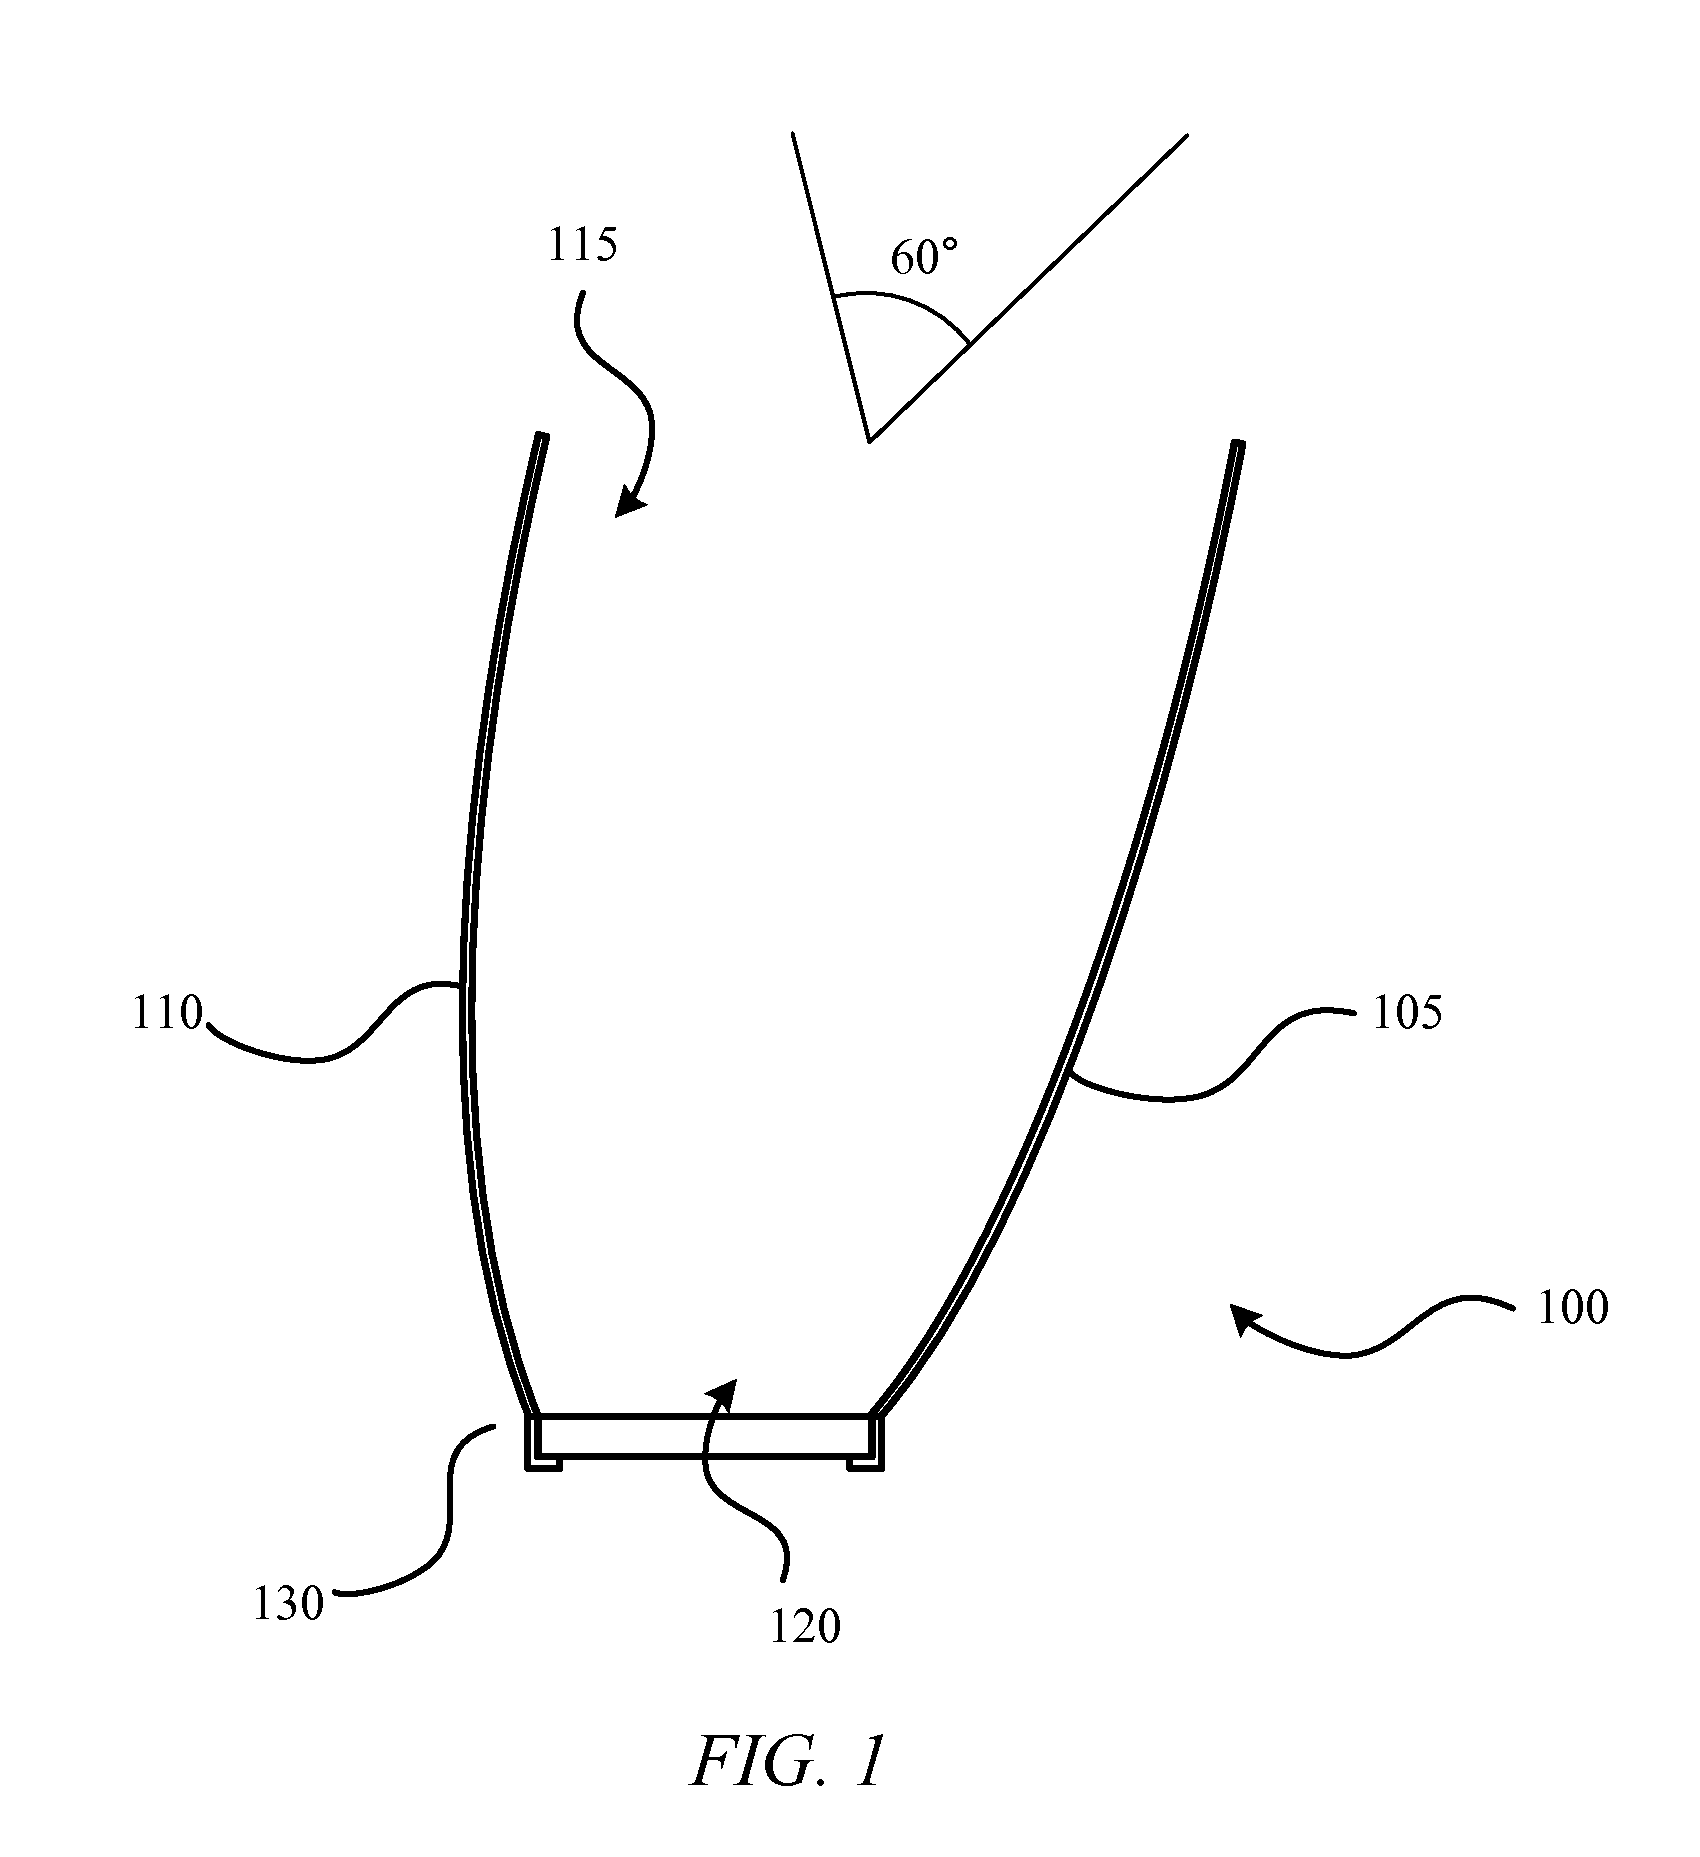 Asymmetric Parabolic Compound Concentrator With Photovoltaic Cells